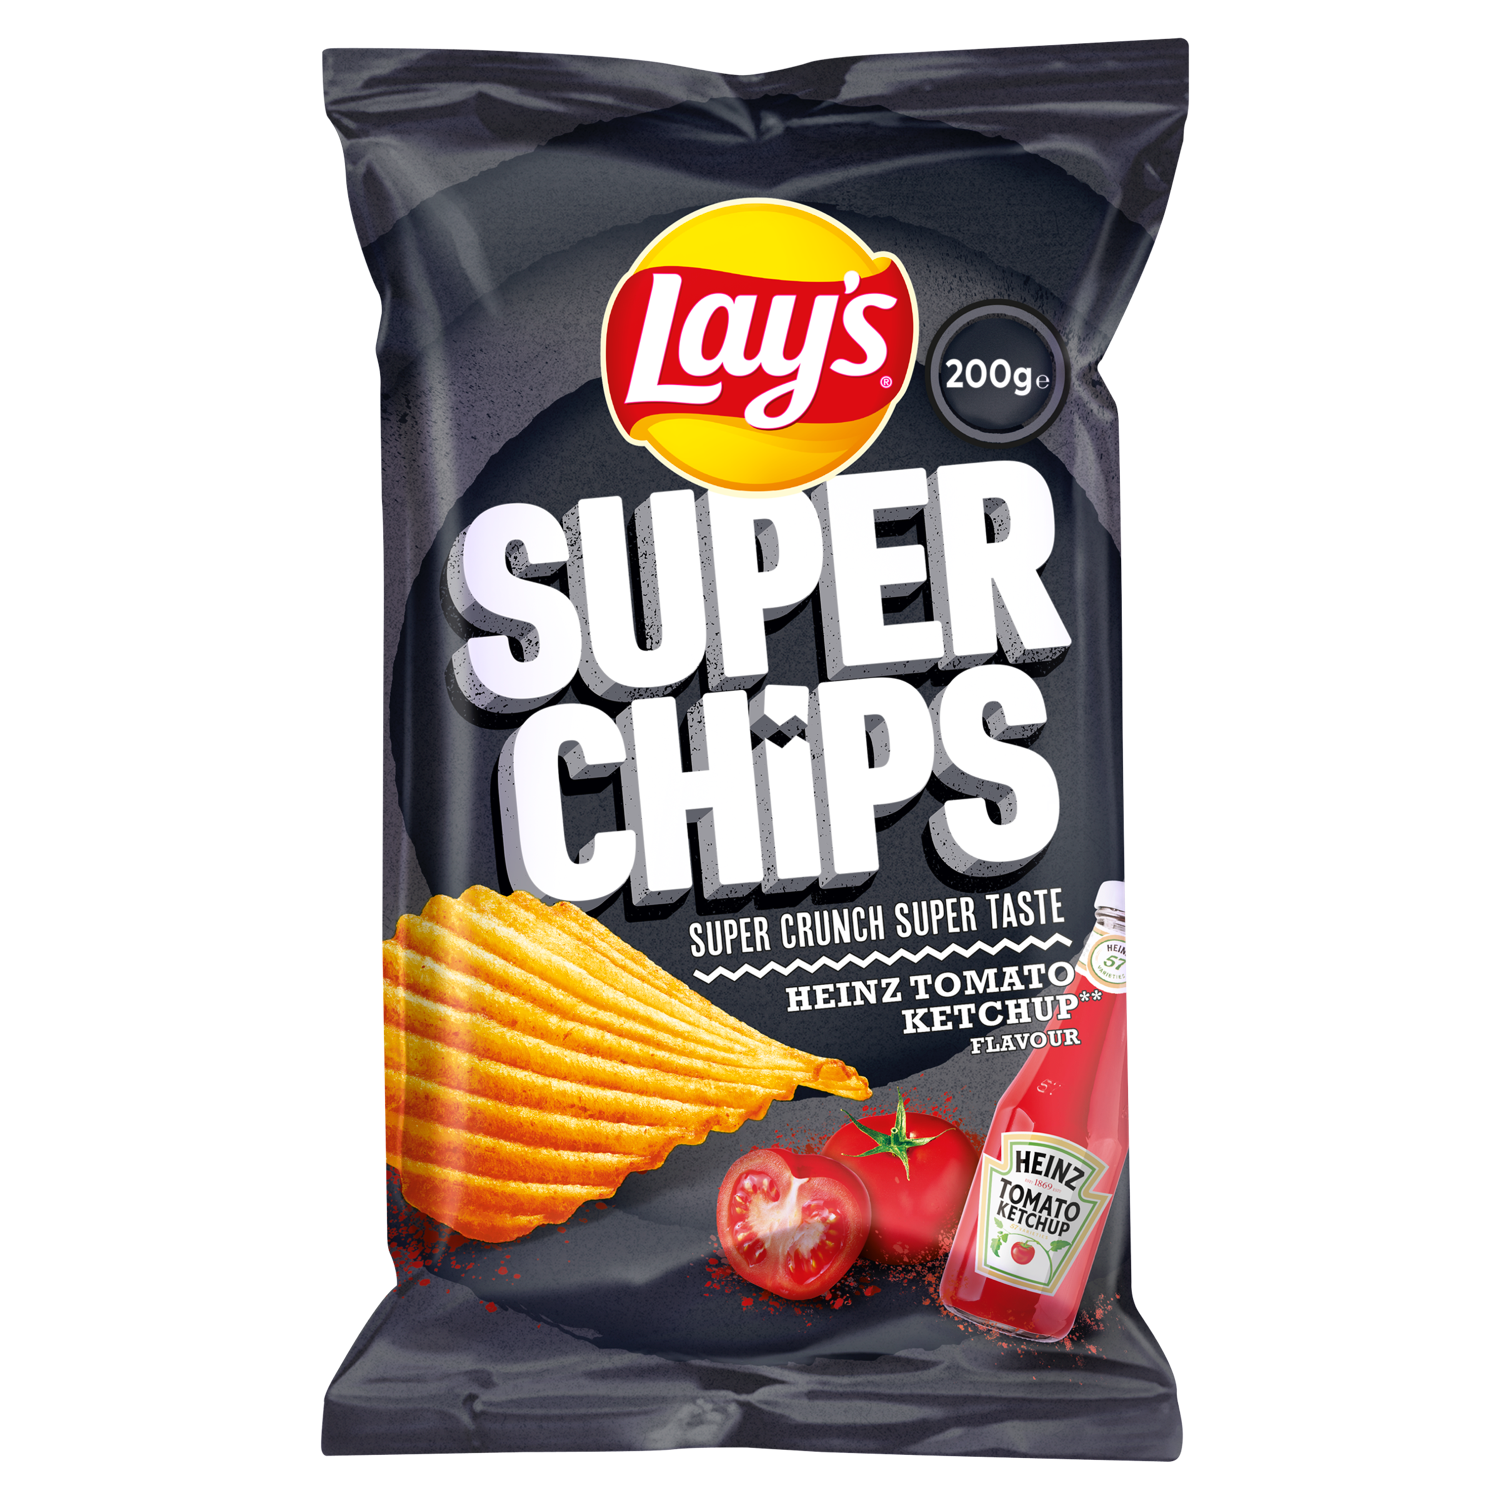 Superchips fun. Lays Hainz. Lays Cheese Everest. Mana Chips tomat. New Zealand Chips Tomato.